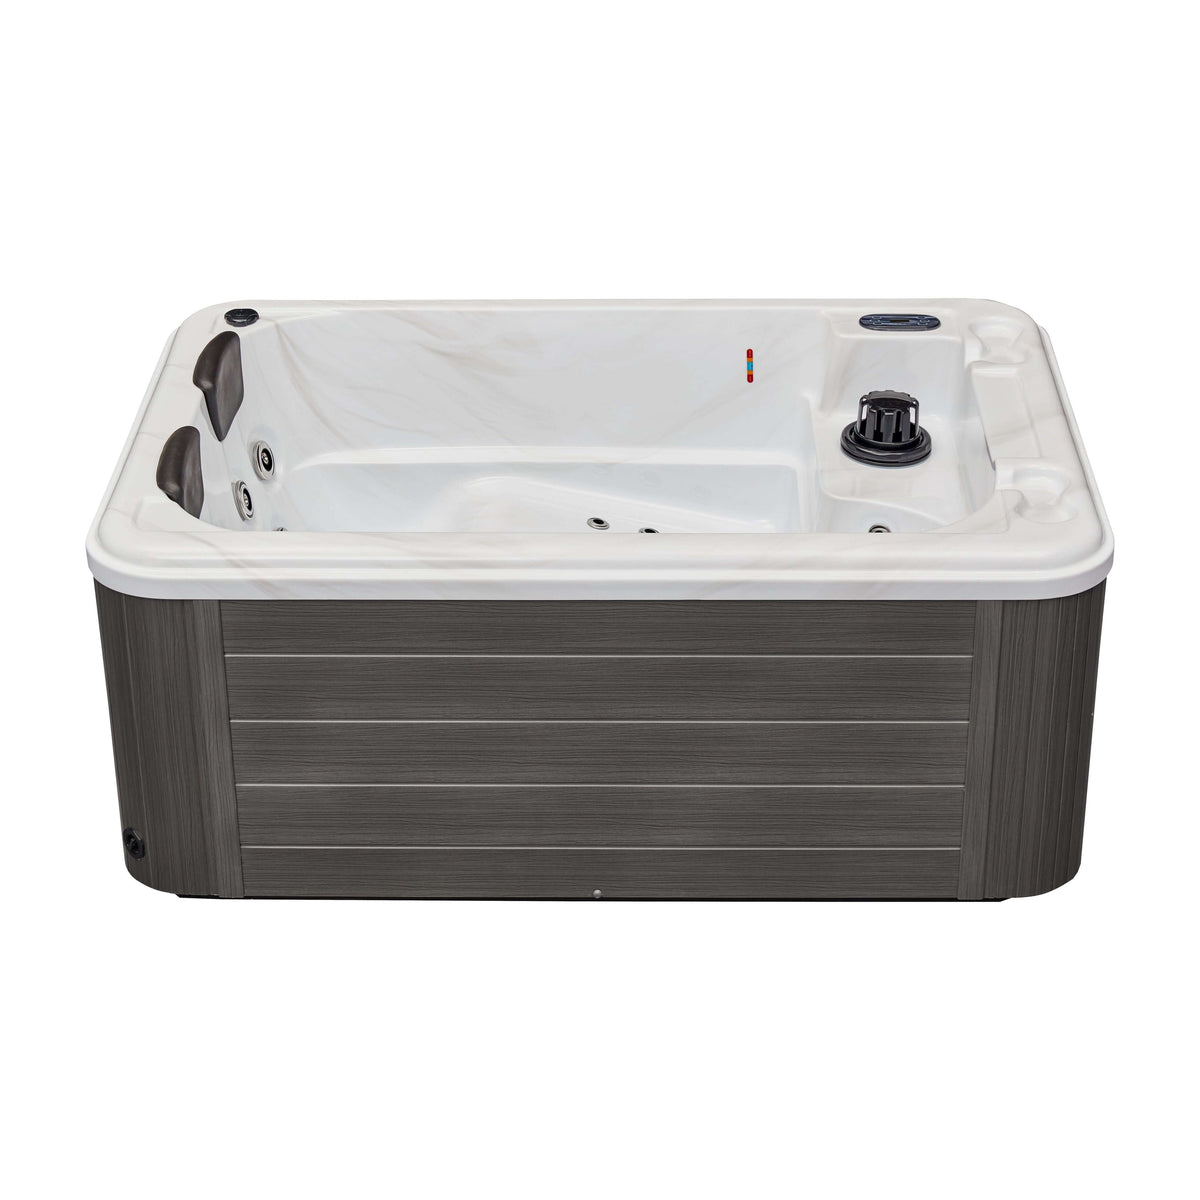 The RILEY 3-person Luxury Hot Tub